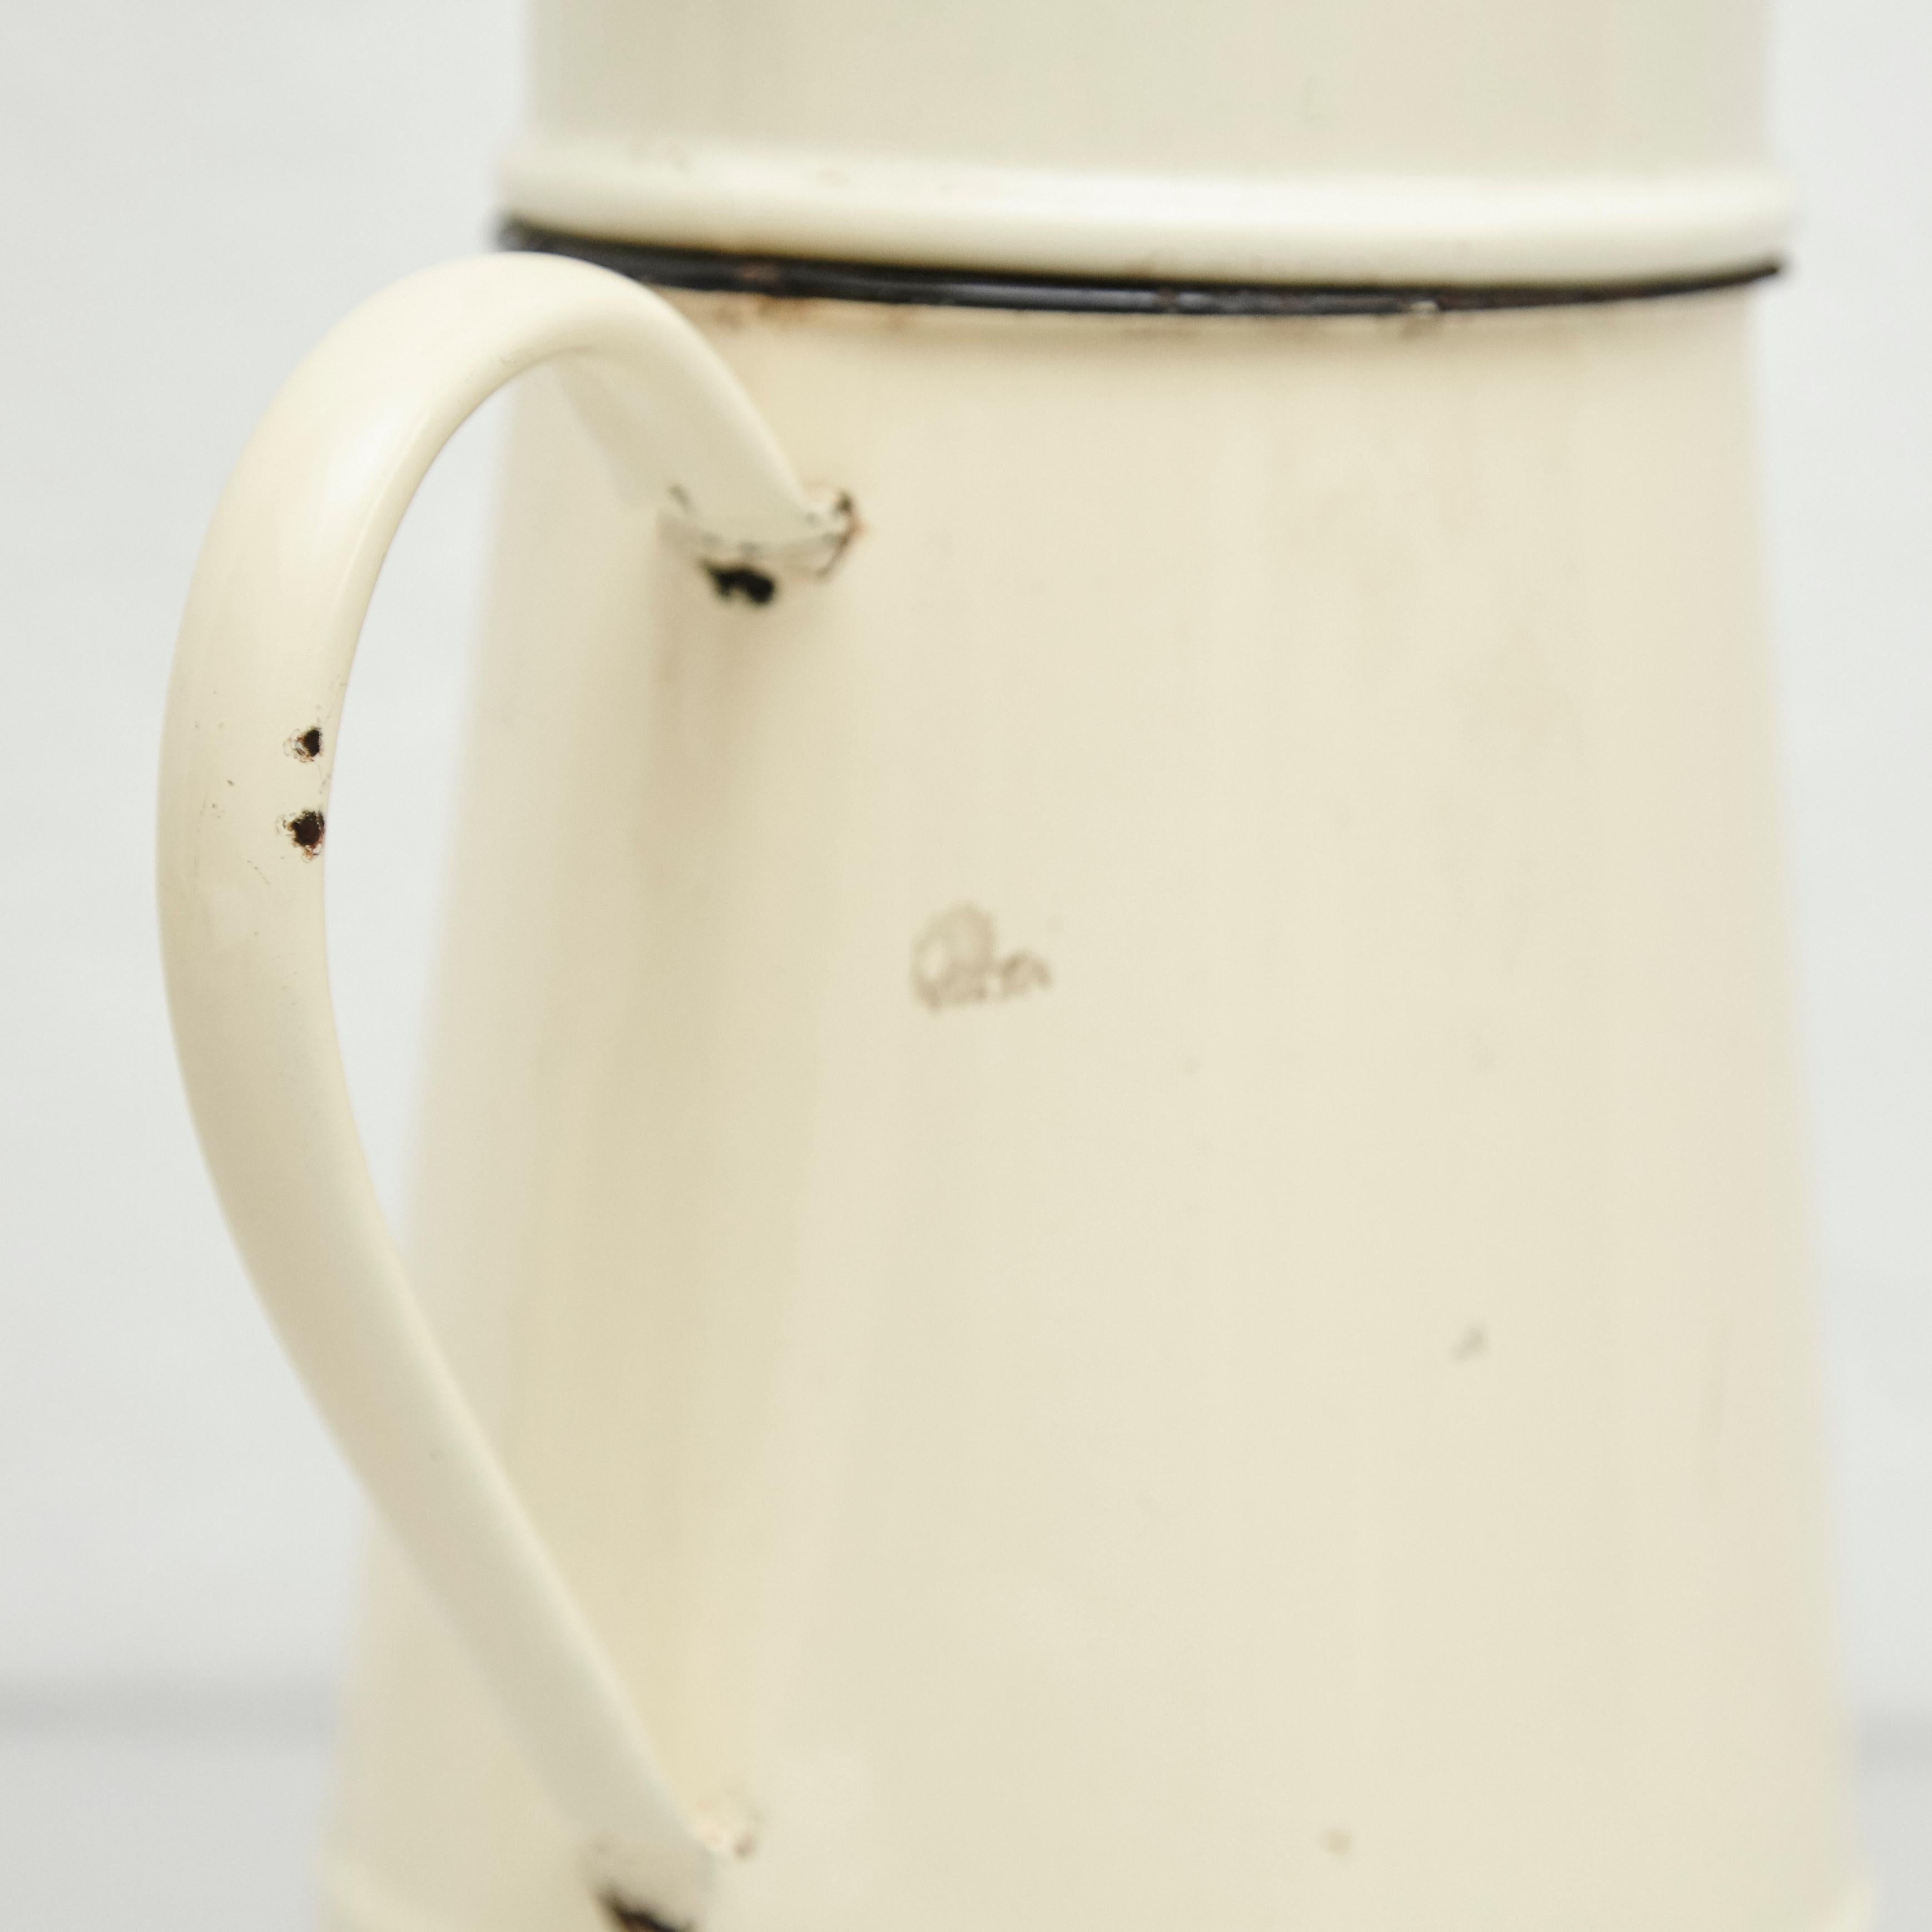 Early 20th Century Vintage French Enamelwared Sculptural Decorative Coffee Maker, circa 1920